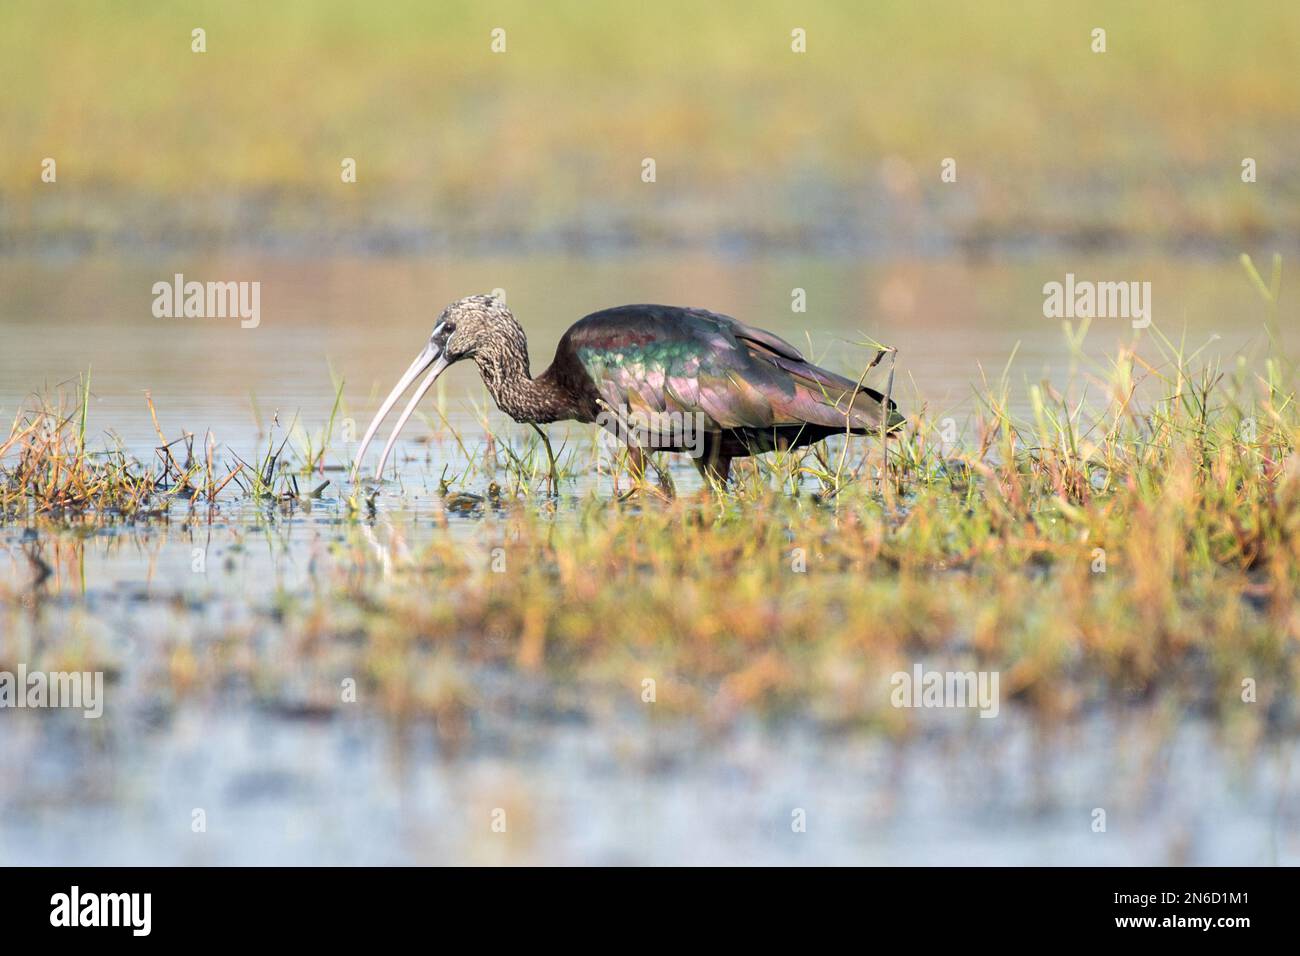 Close up of Glossy Ibis bird with use of selective focus Stock Photo